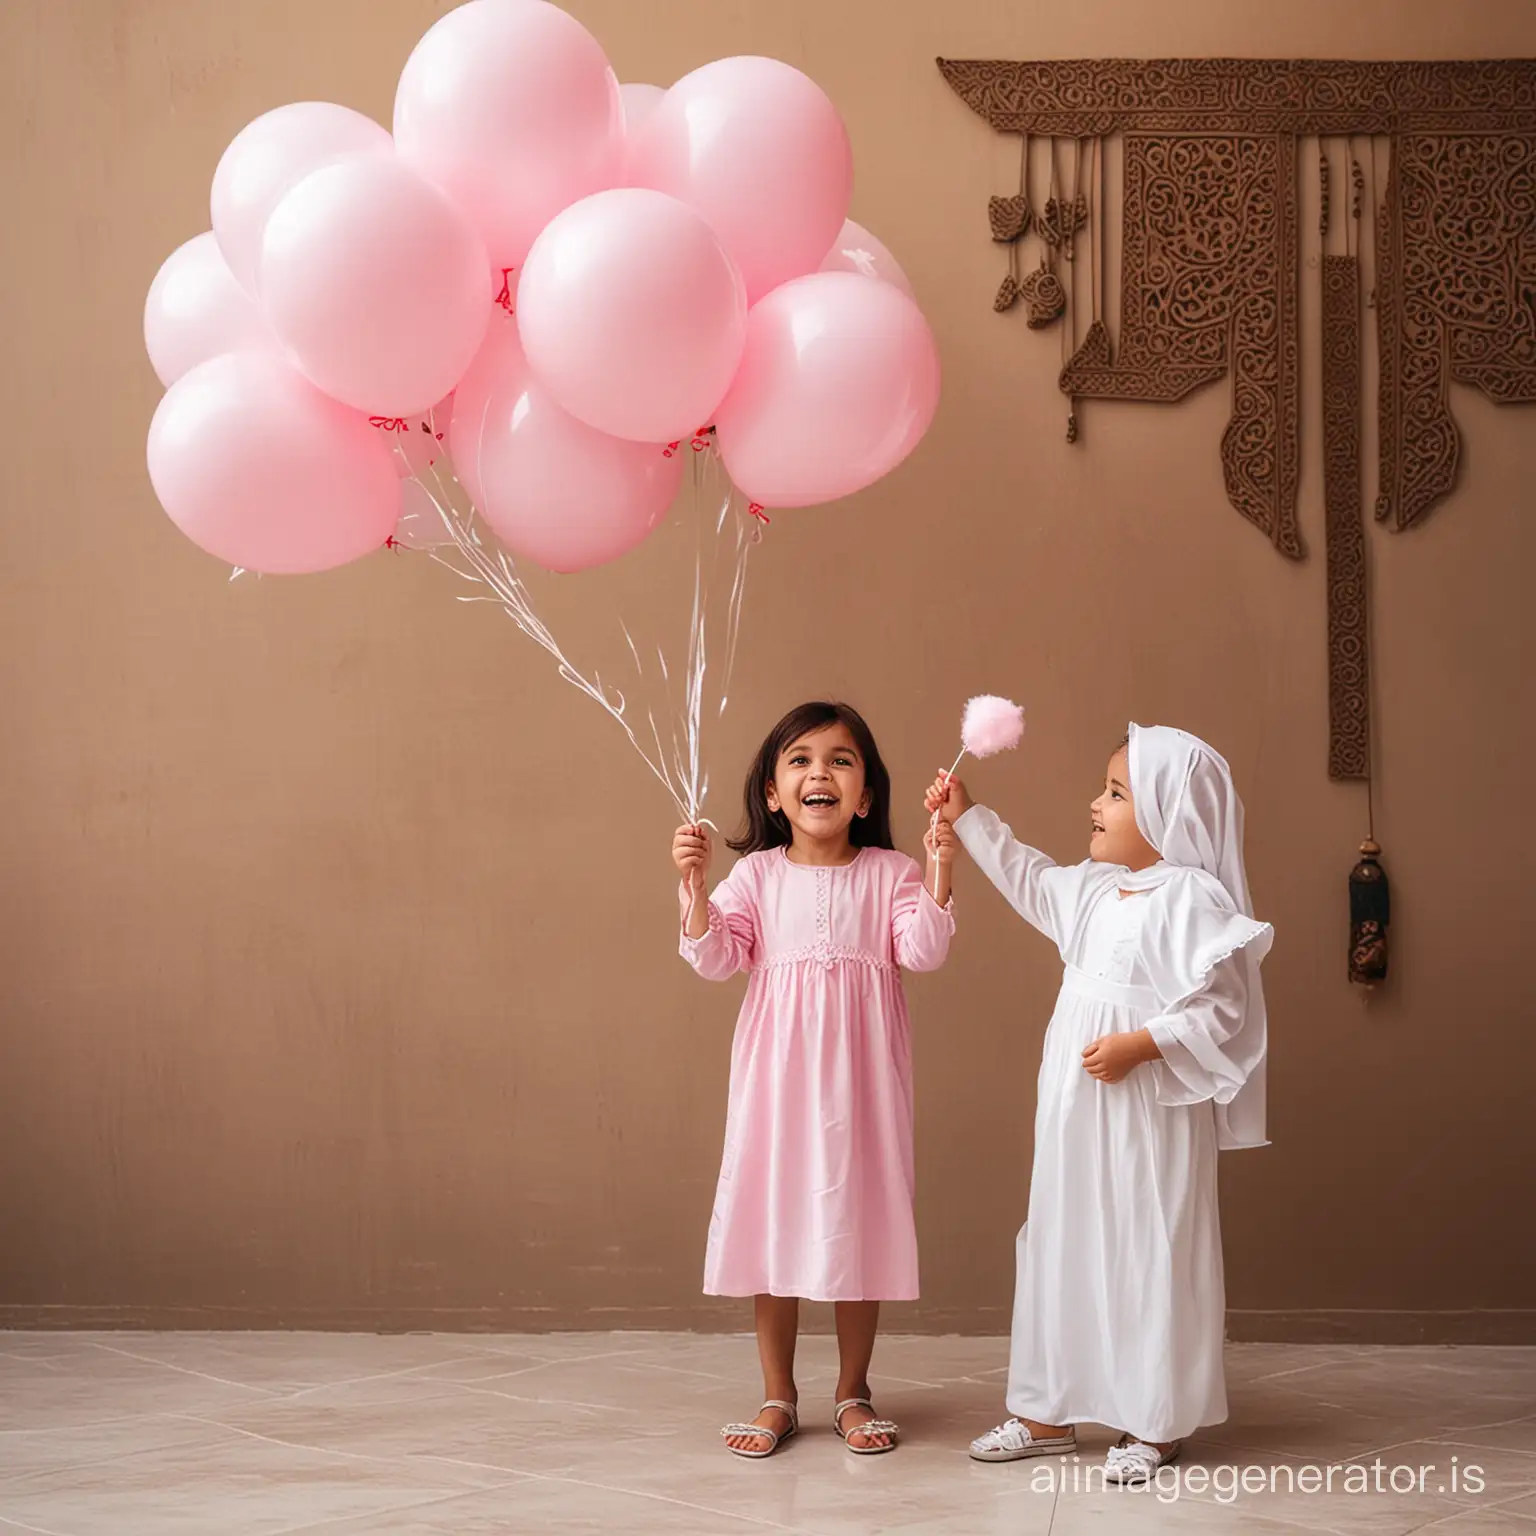 Eid-Celebration-Arab-Children-Delight-in-Balloons-and-Cotton-Candy